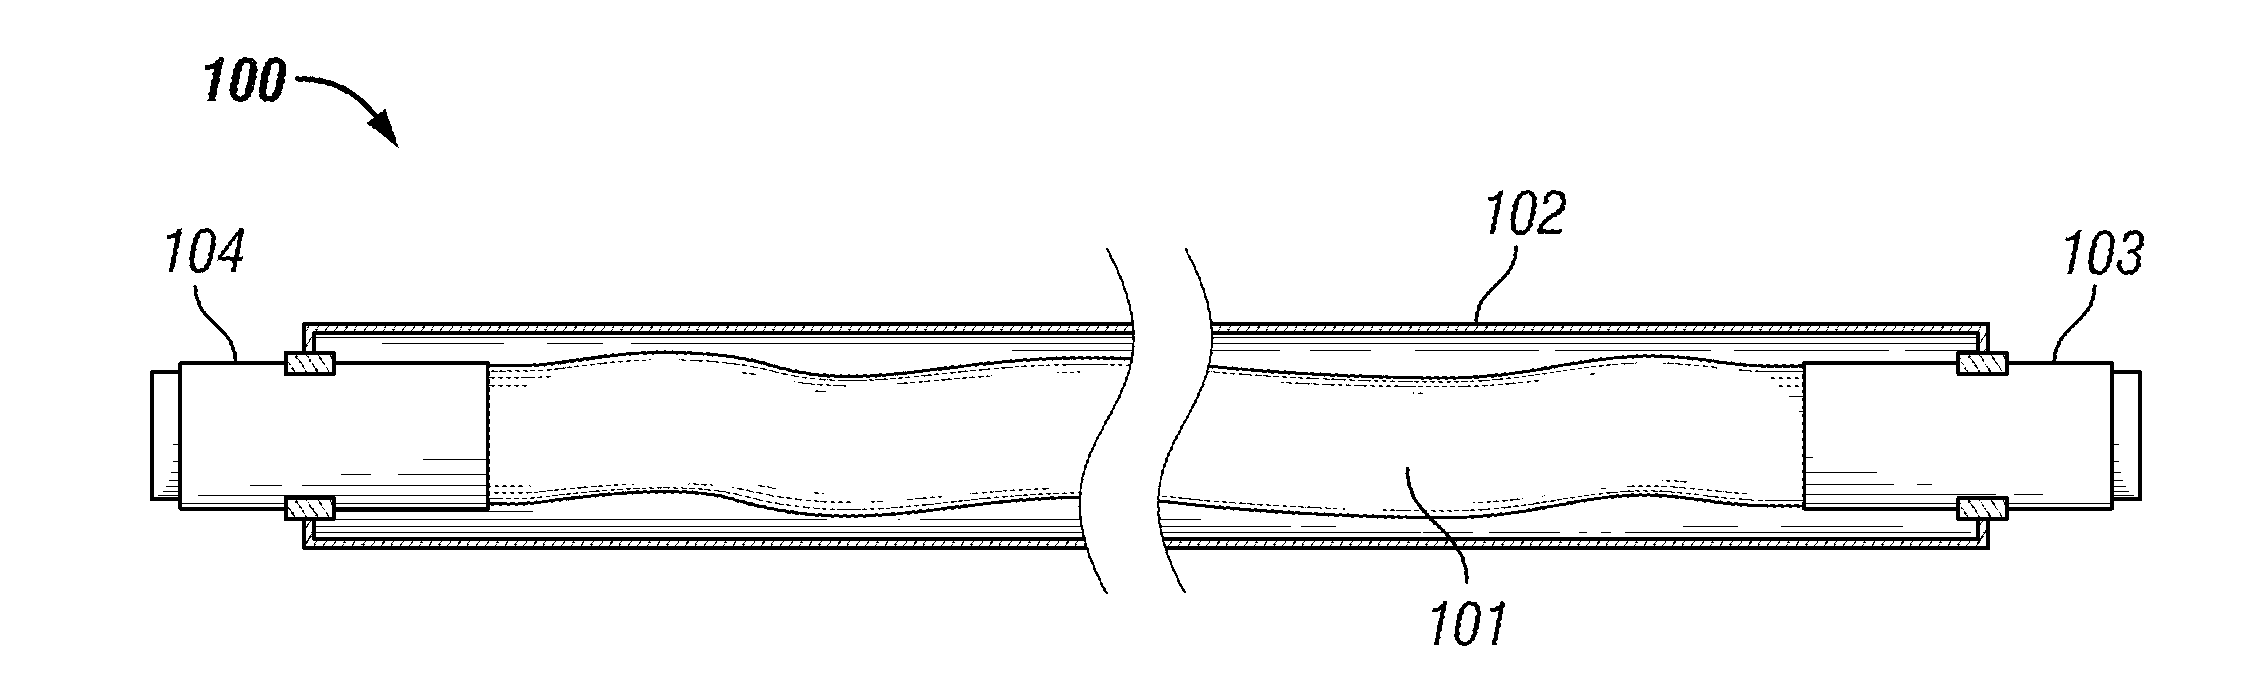 Pipe-in-pipe apparatus including an engineered pipe